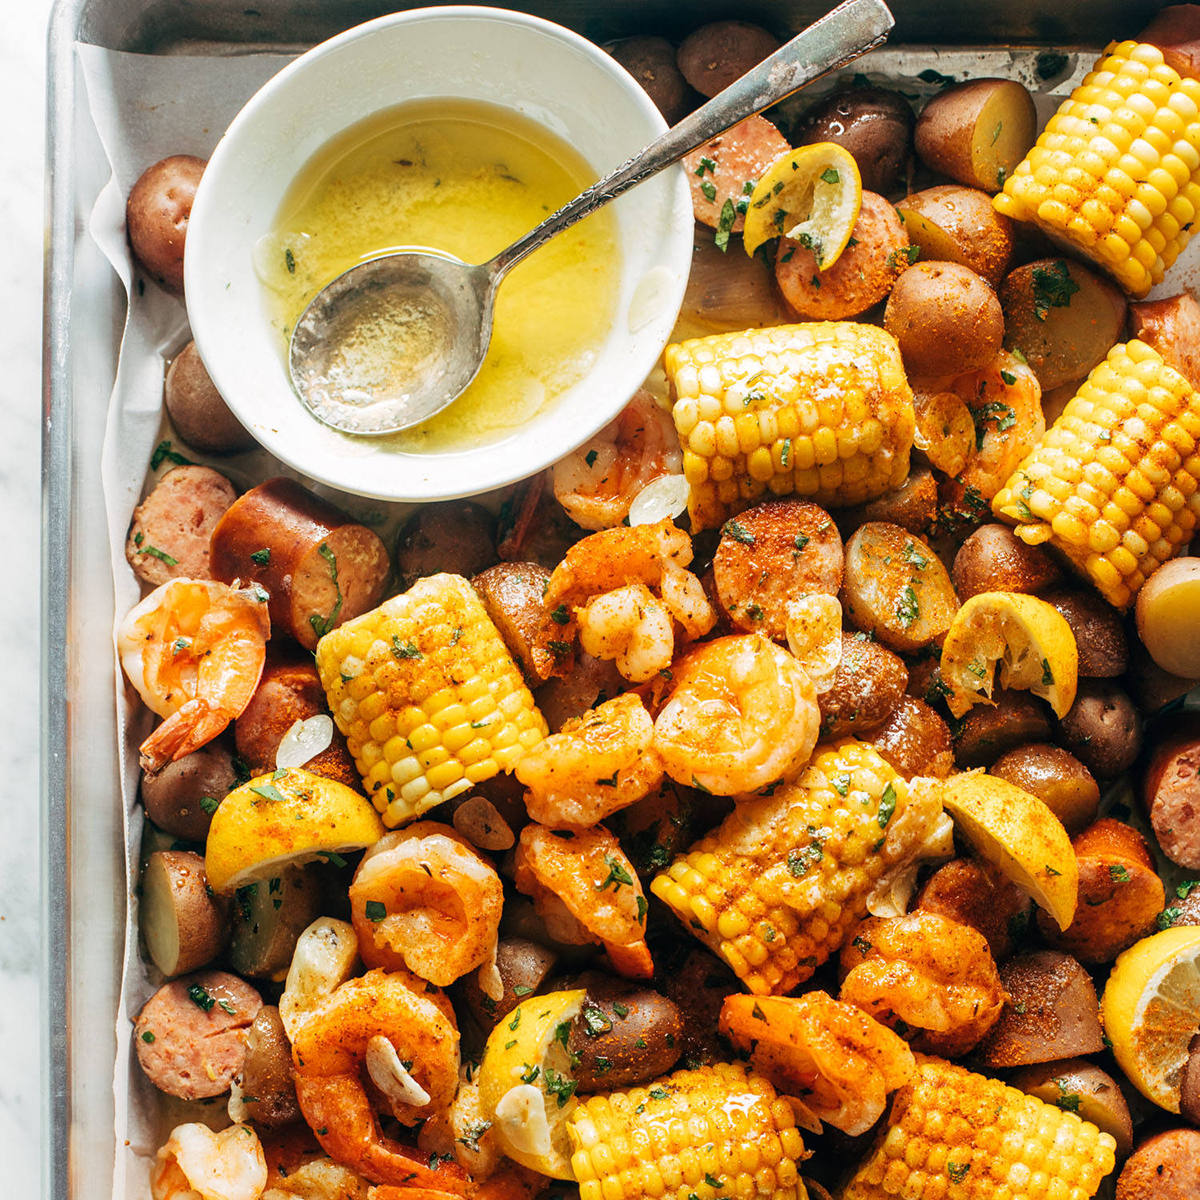 We’re talking butter-drizzled juicy shrimp, steamy corn and potatoes